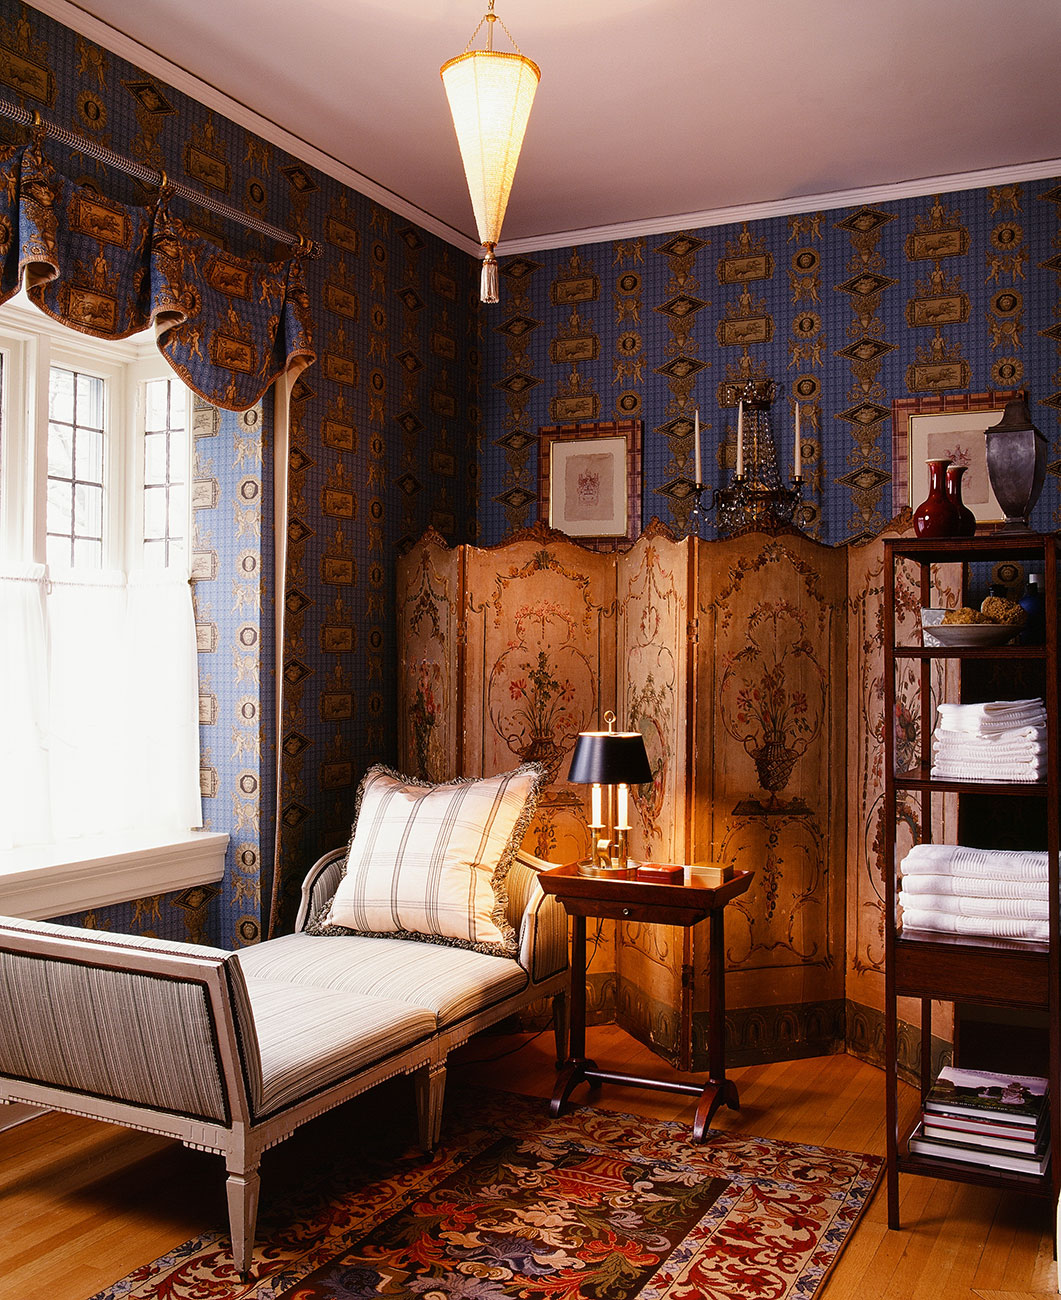 showhouse rooms, r. goodwin ltd.